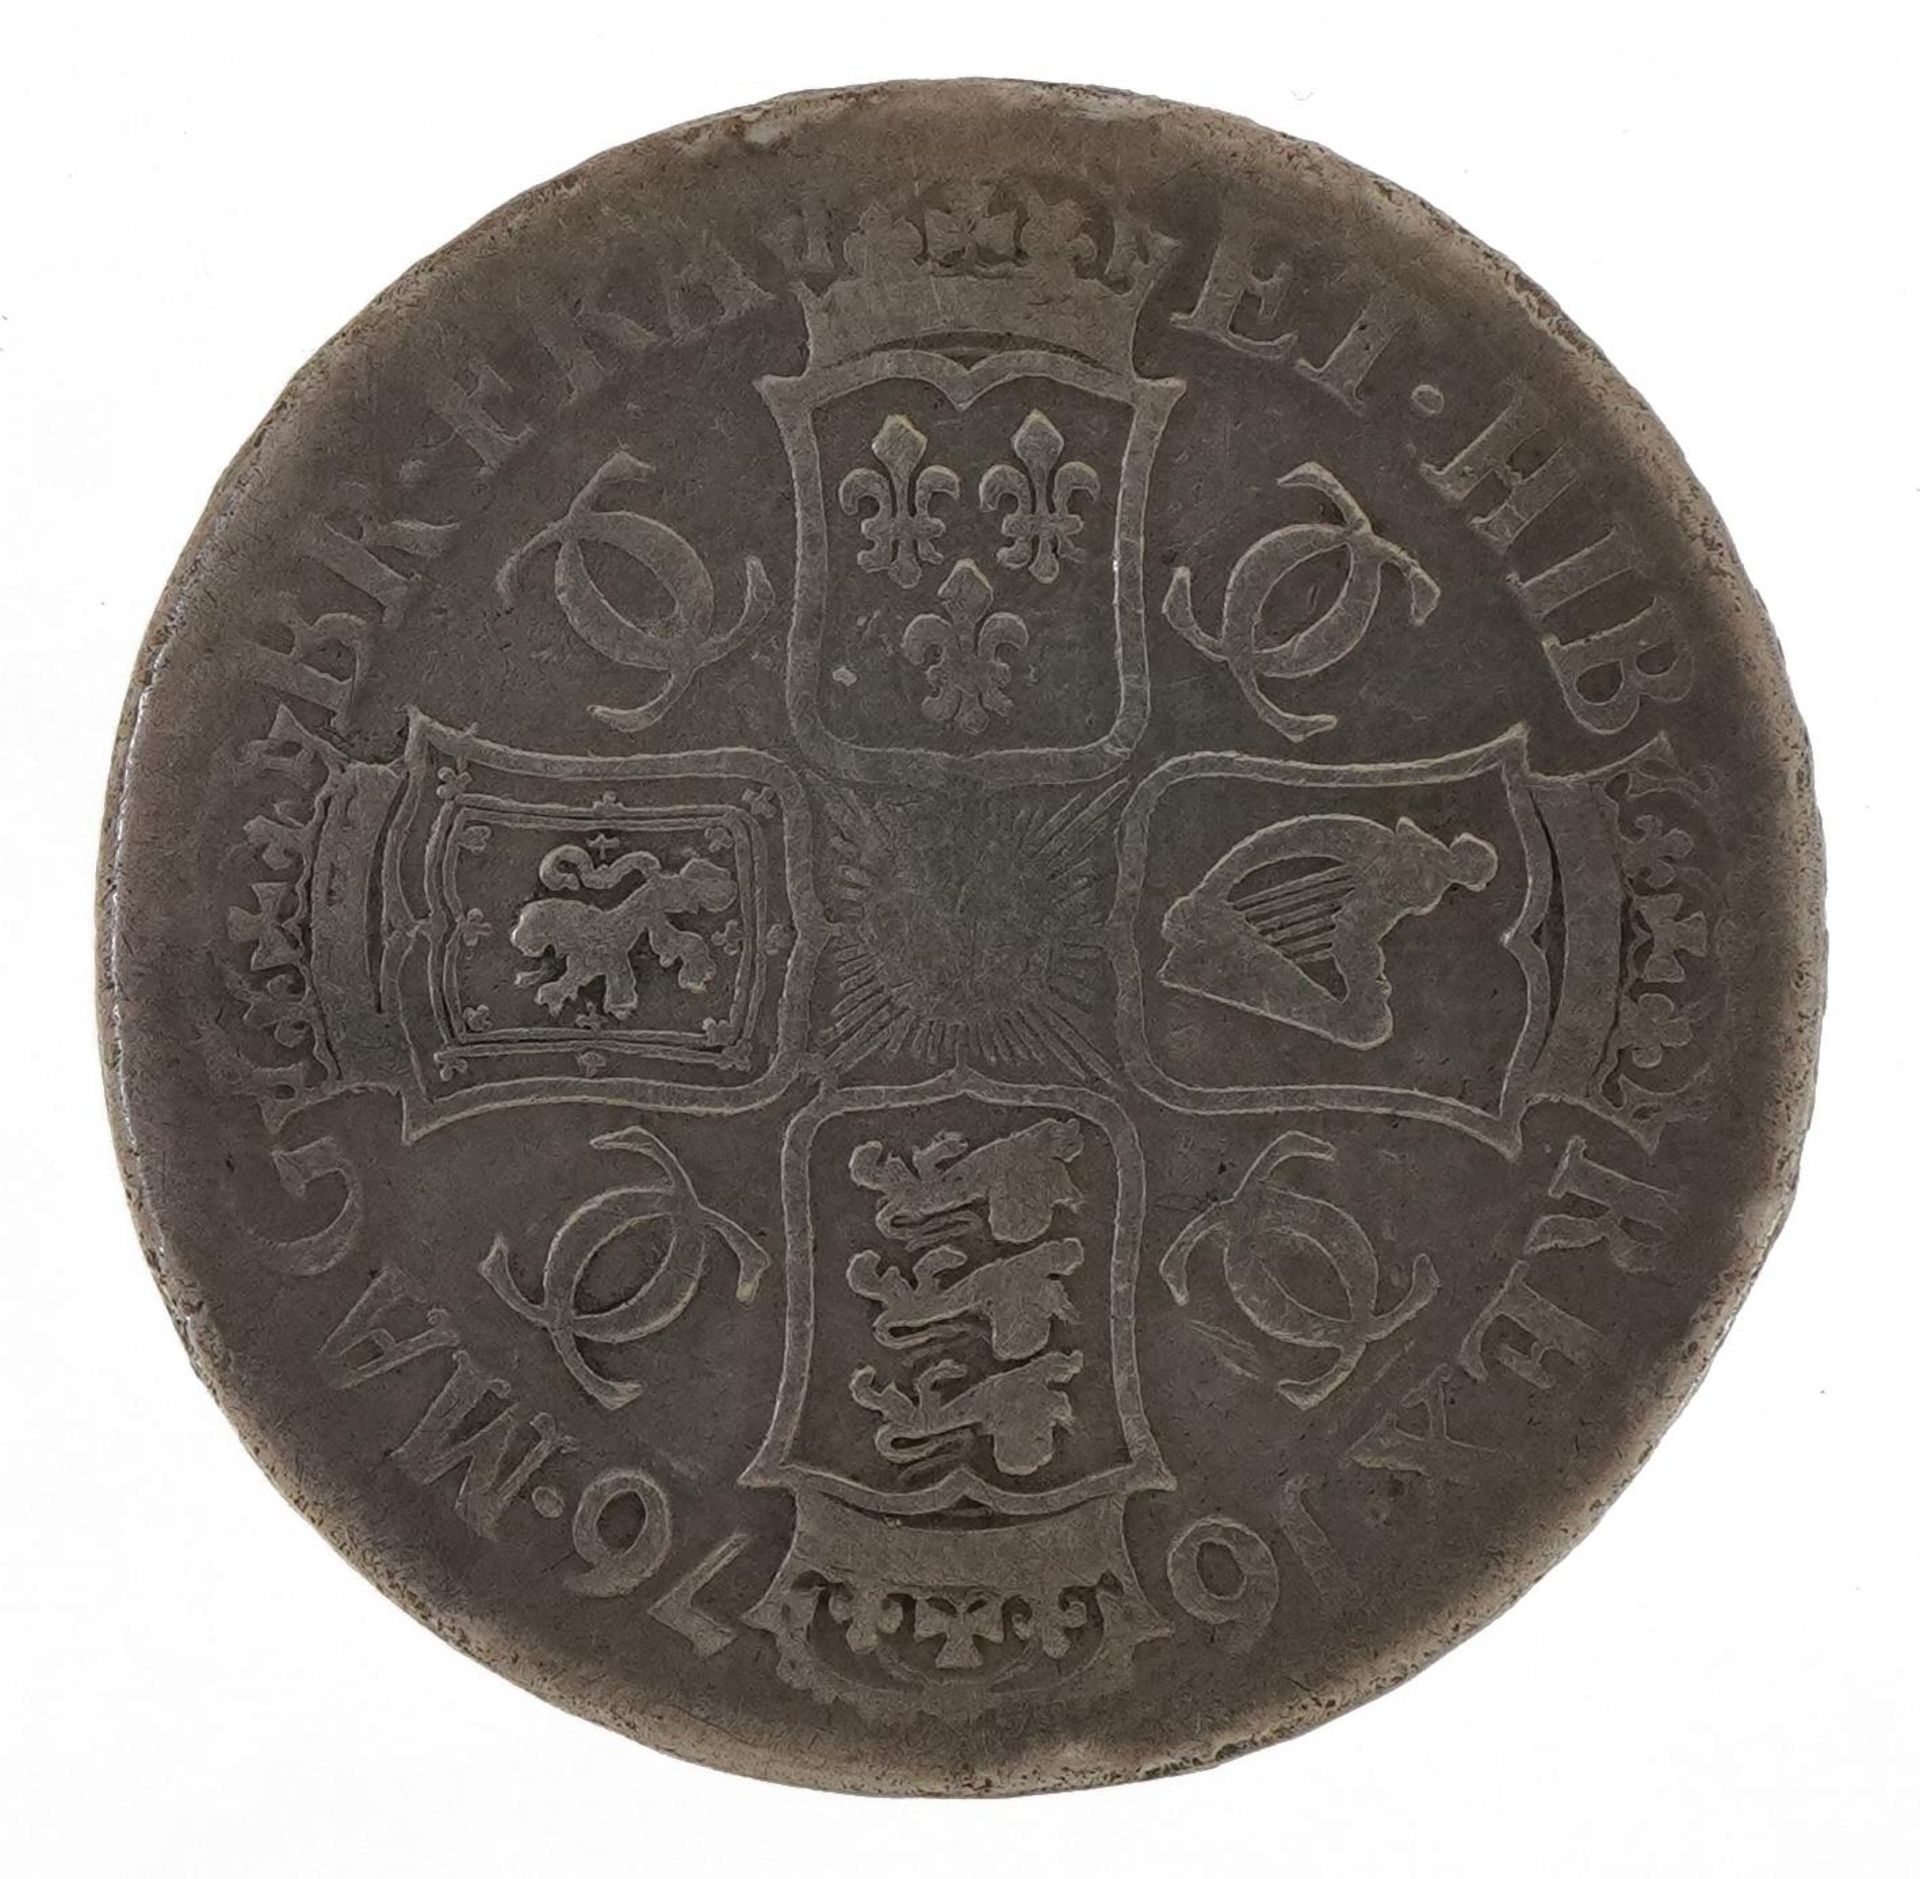 Charles II 1676 silver crown : For further information on this lot please visit Eastbourneauction.